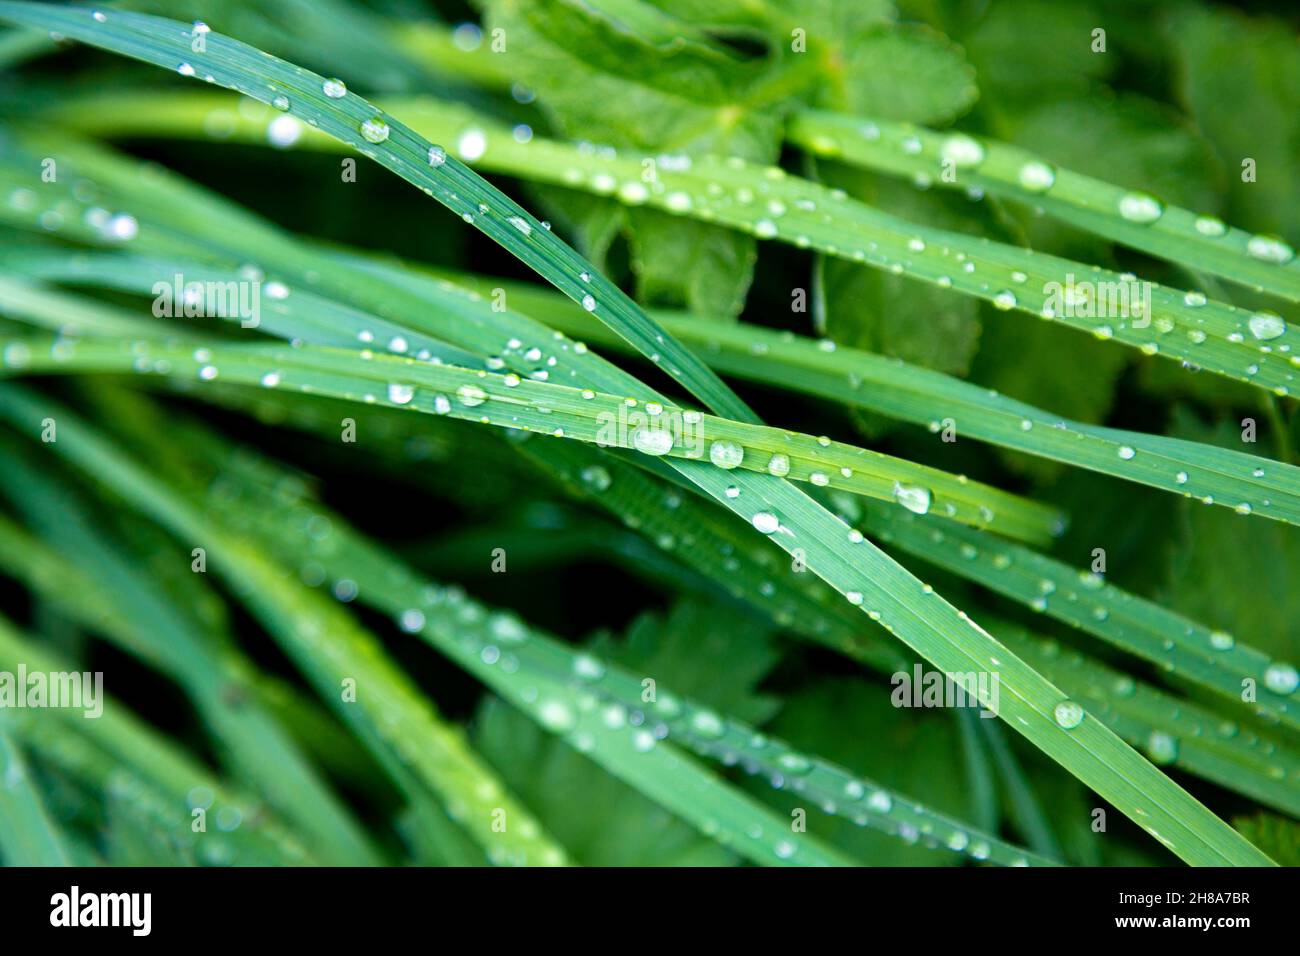 Grass blades with rain drops on the surface Stock Photo